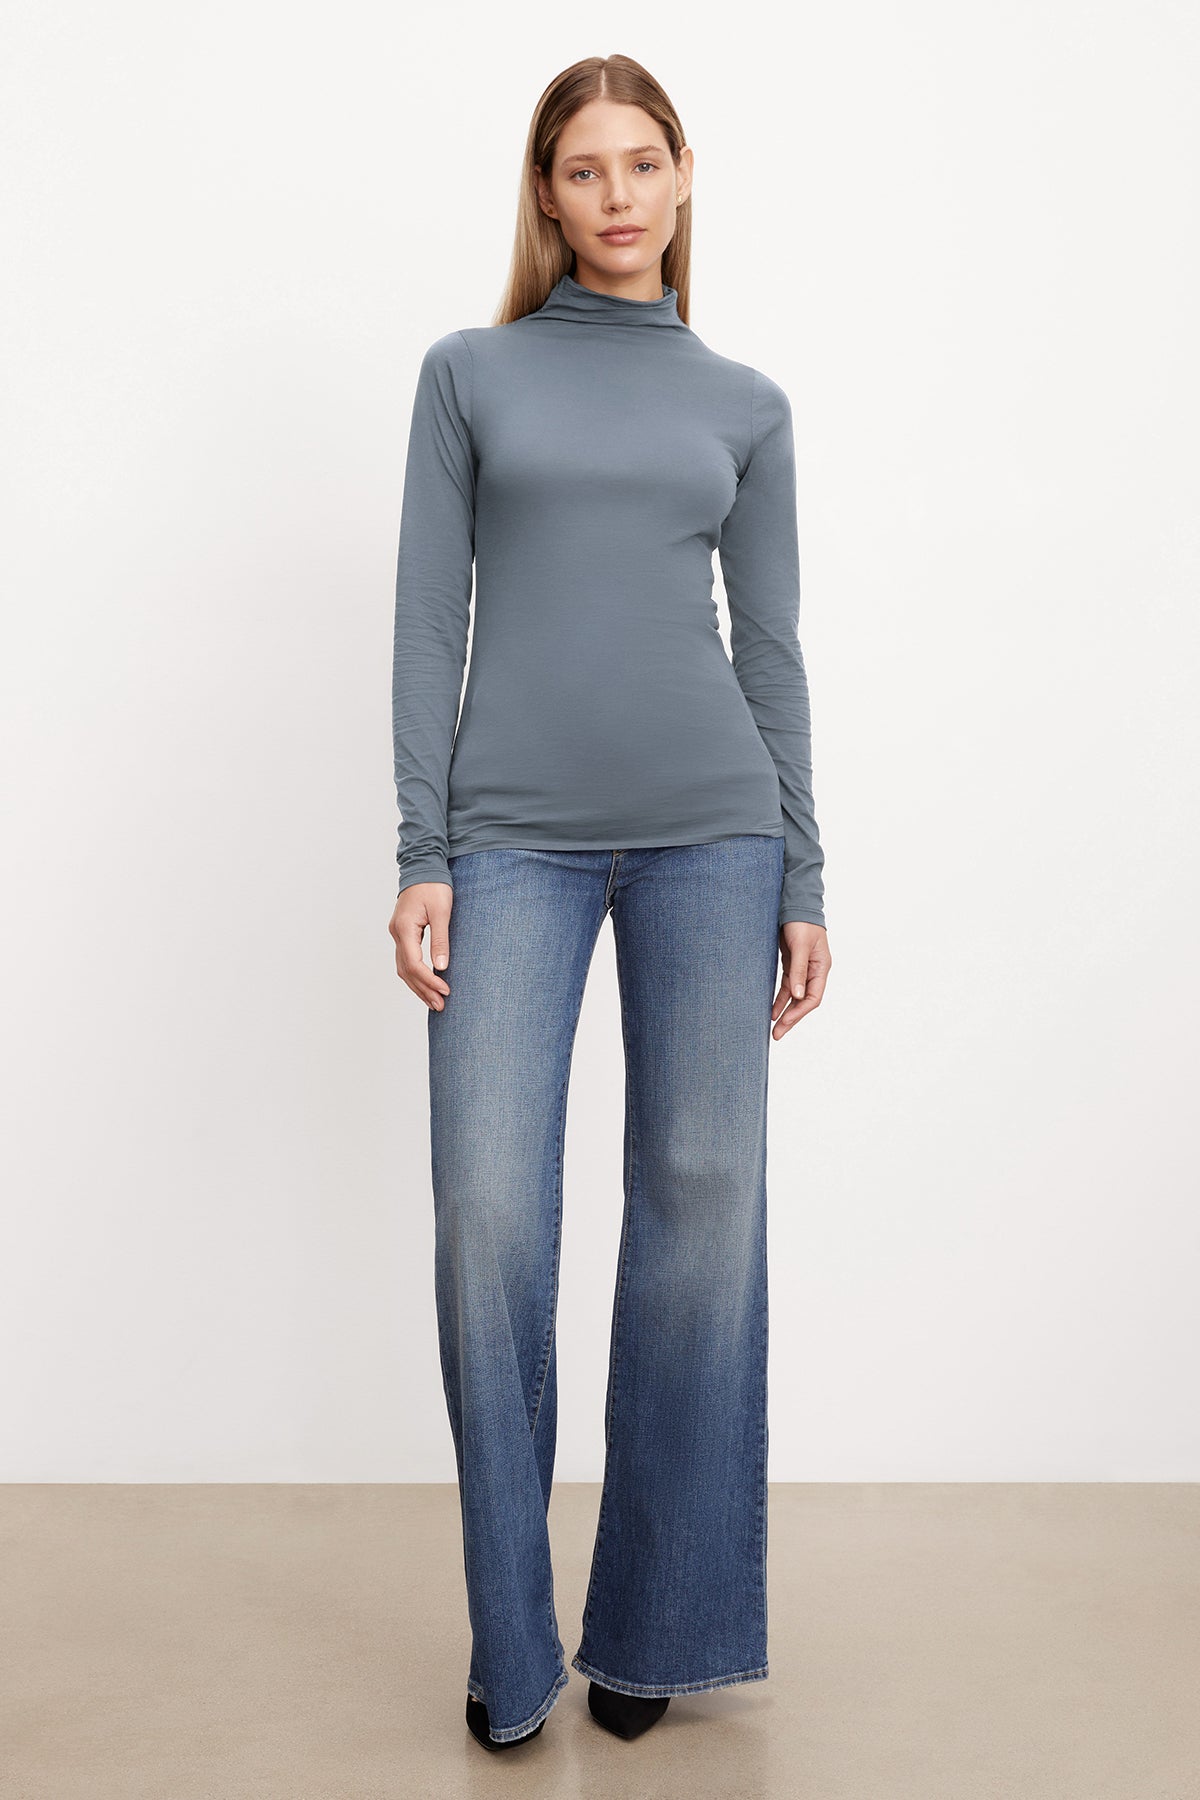   A model wearing a TALISIA GAUZY WHISPER FITTED MOCK NECK TEE from Velvet by Graham & Spencer and wide leg jeans. 